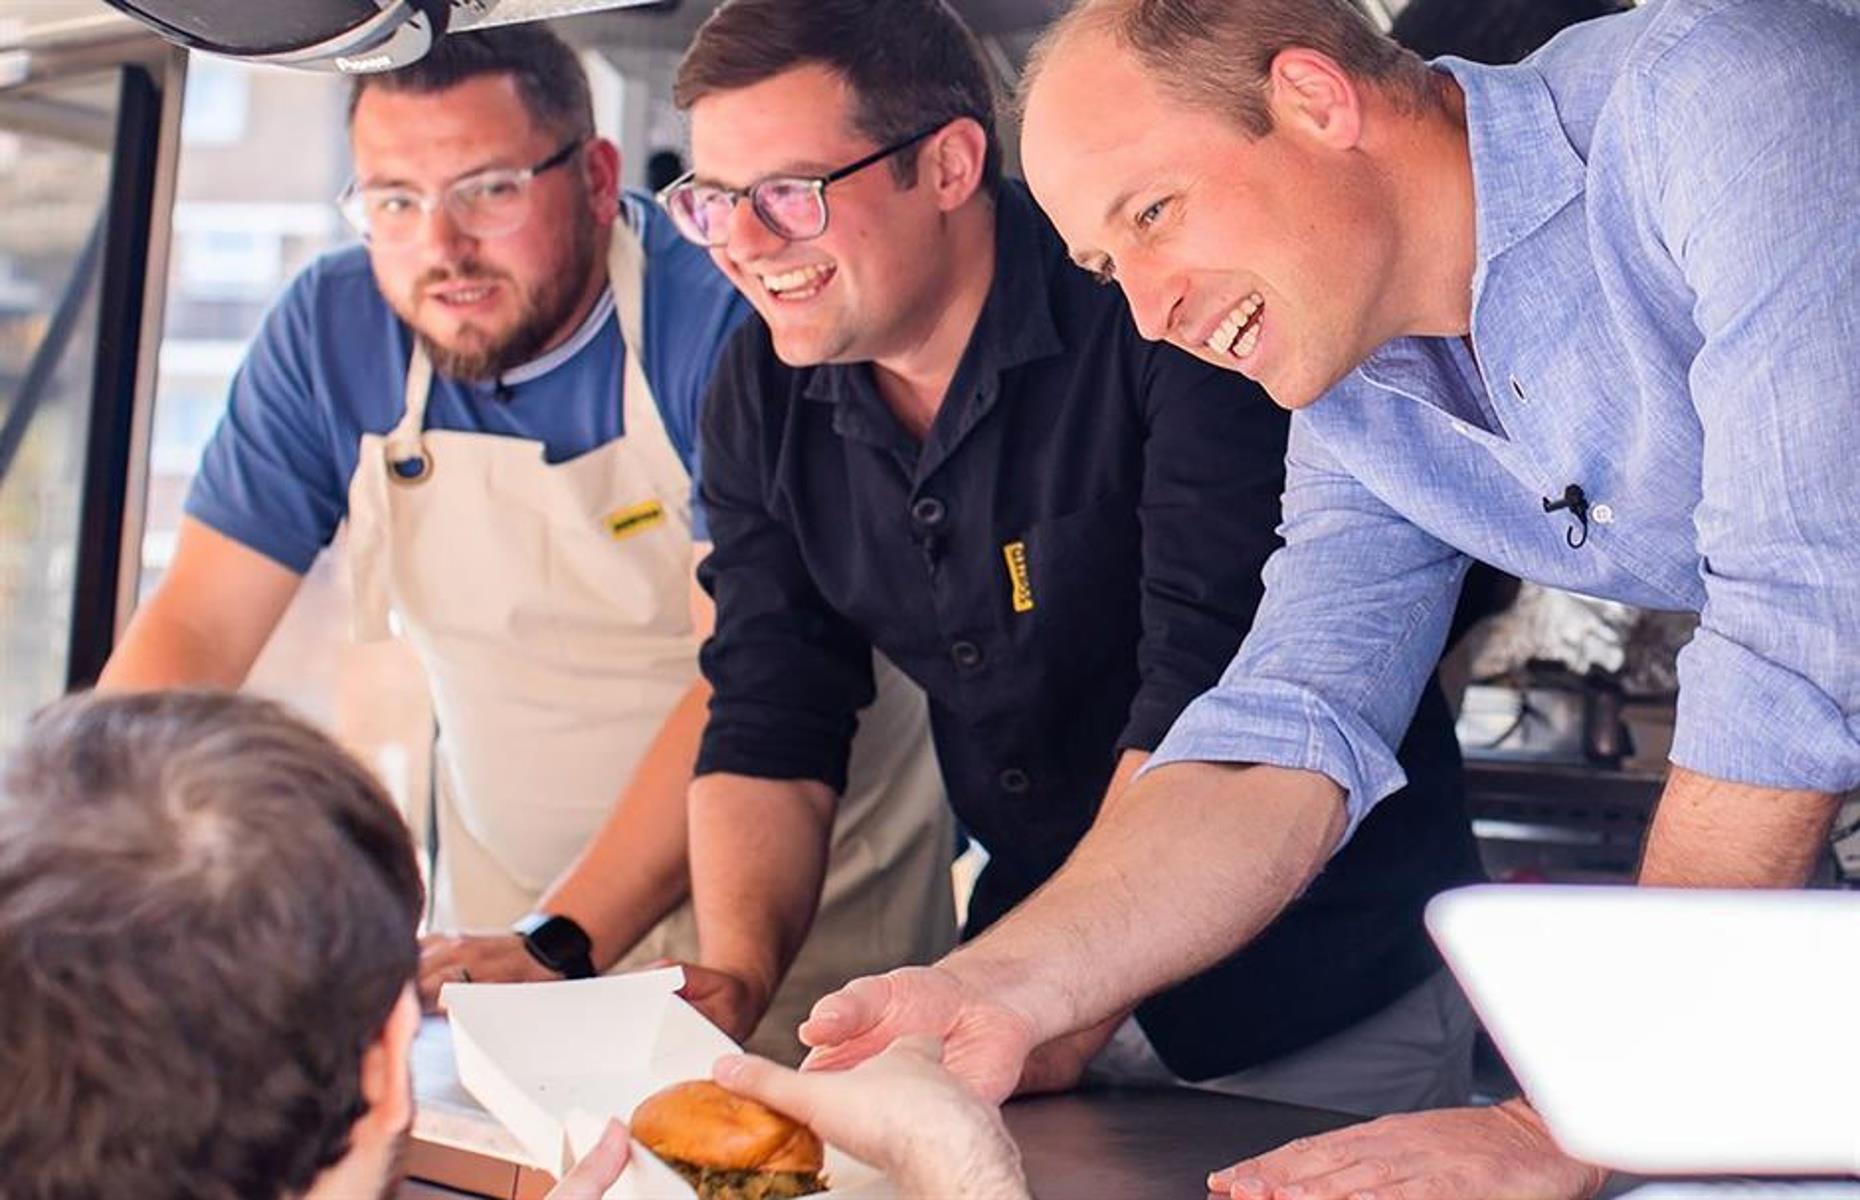 <p>In July 2023, Prince William teamed up with online cooking community Sorted Food to serve burgers from its food truck. The special was the Earthshot burger, developed using three products that won the 2022 Earthshot Prize, an award launched by the Prince of Wales to find innovative solutions to the world’s greatest environmental challenges. The veggie burgers were cooked in a Mukuru Clean Stove, which generates 70% less pollution than a traditional stove, and served in Notpla boxes, a fully biodegradable plastic alternative made from seaweed and plants.</p>